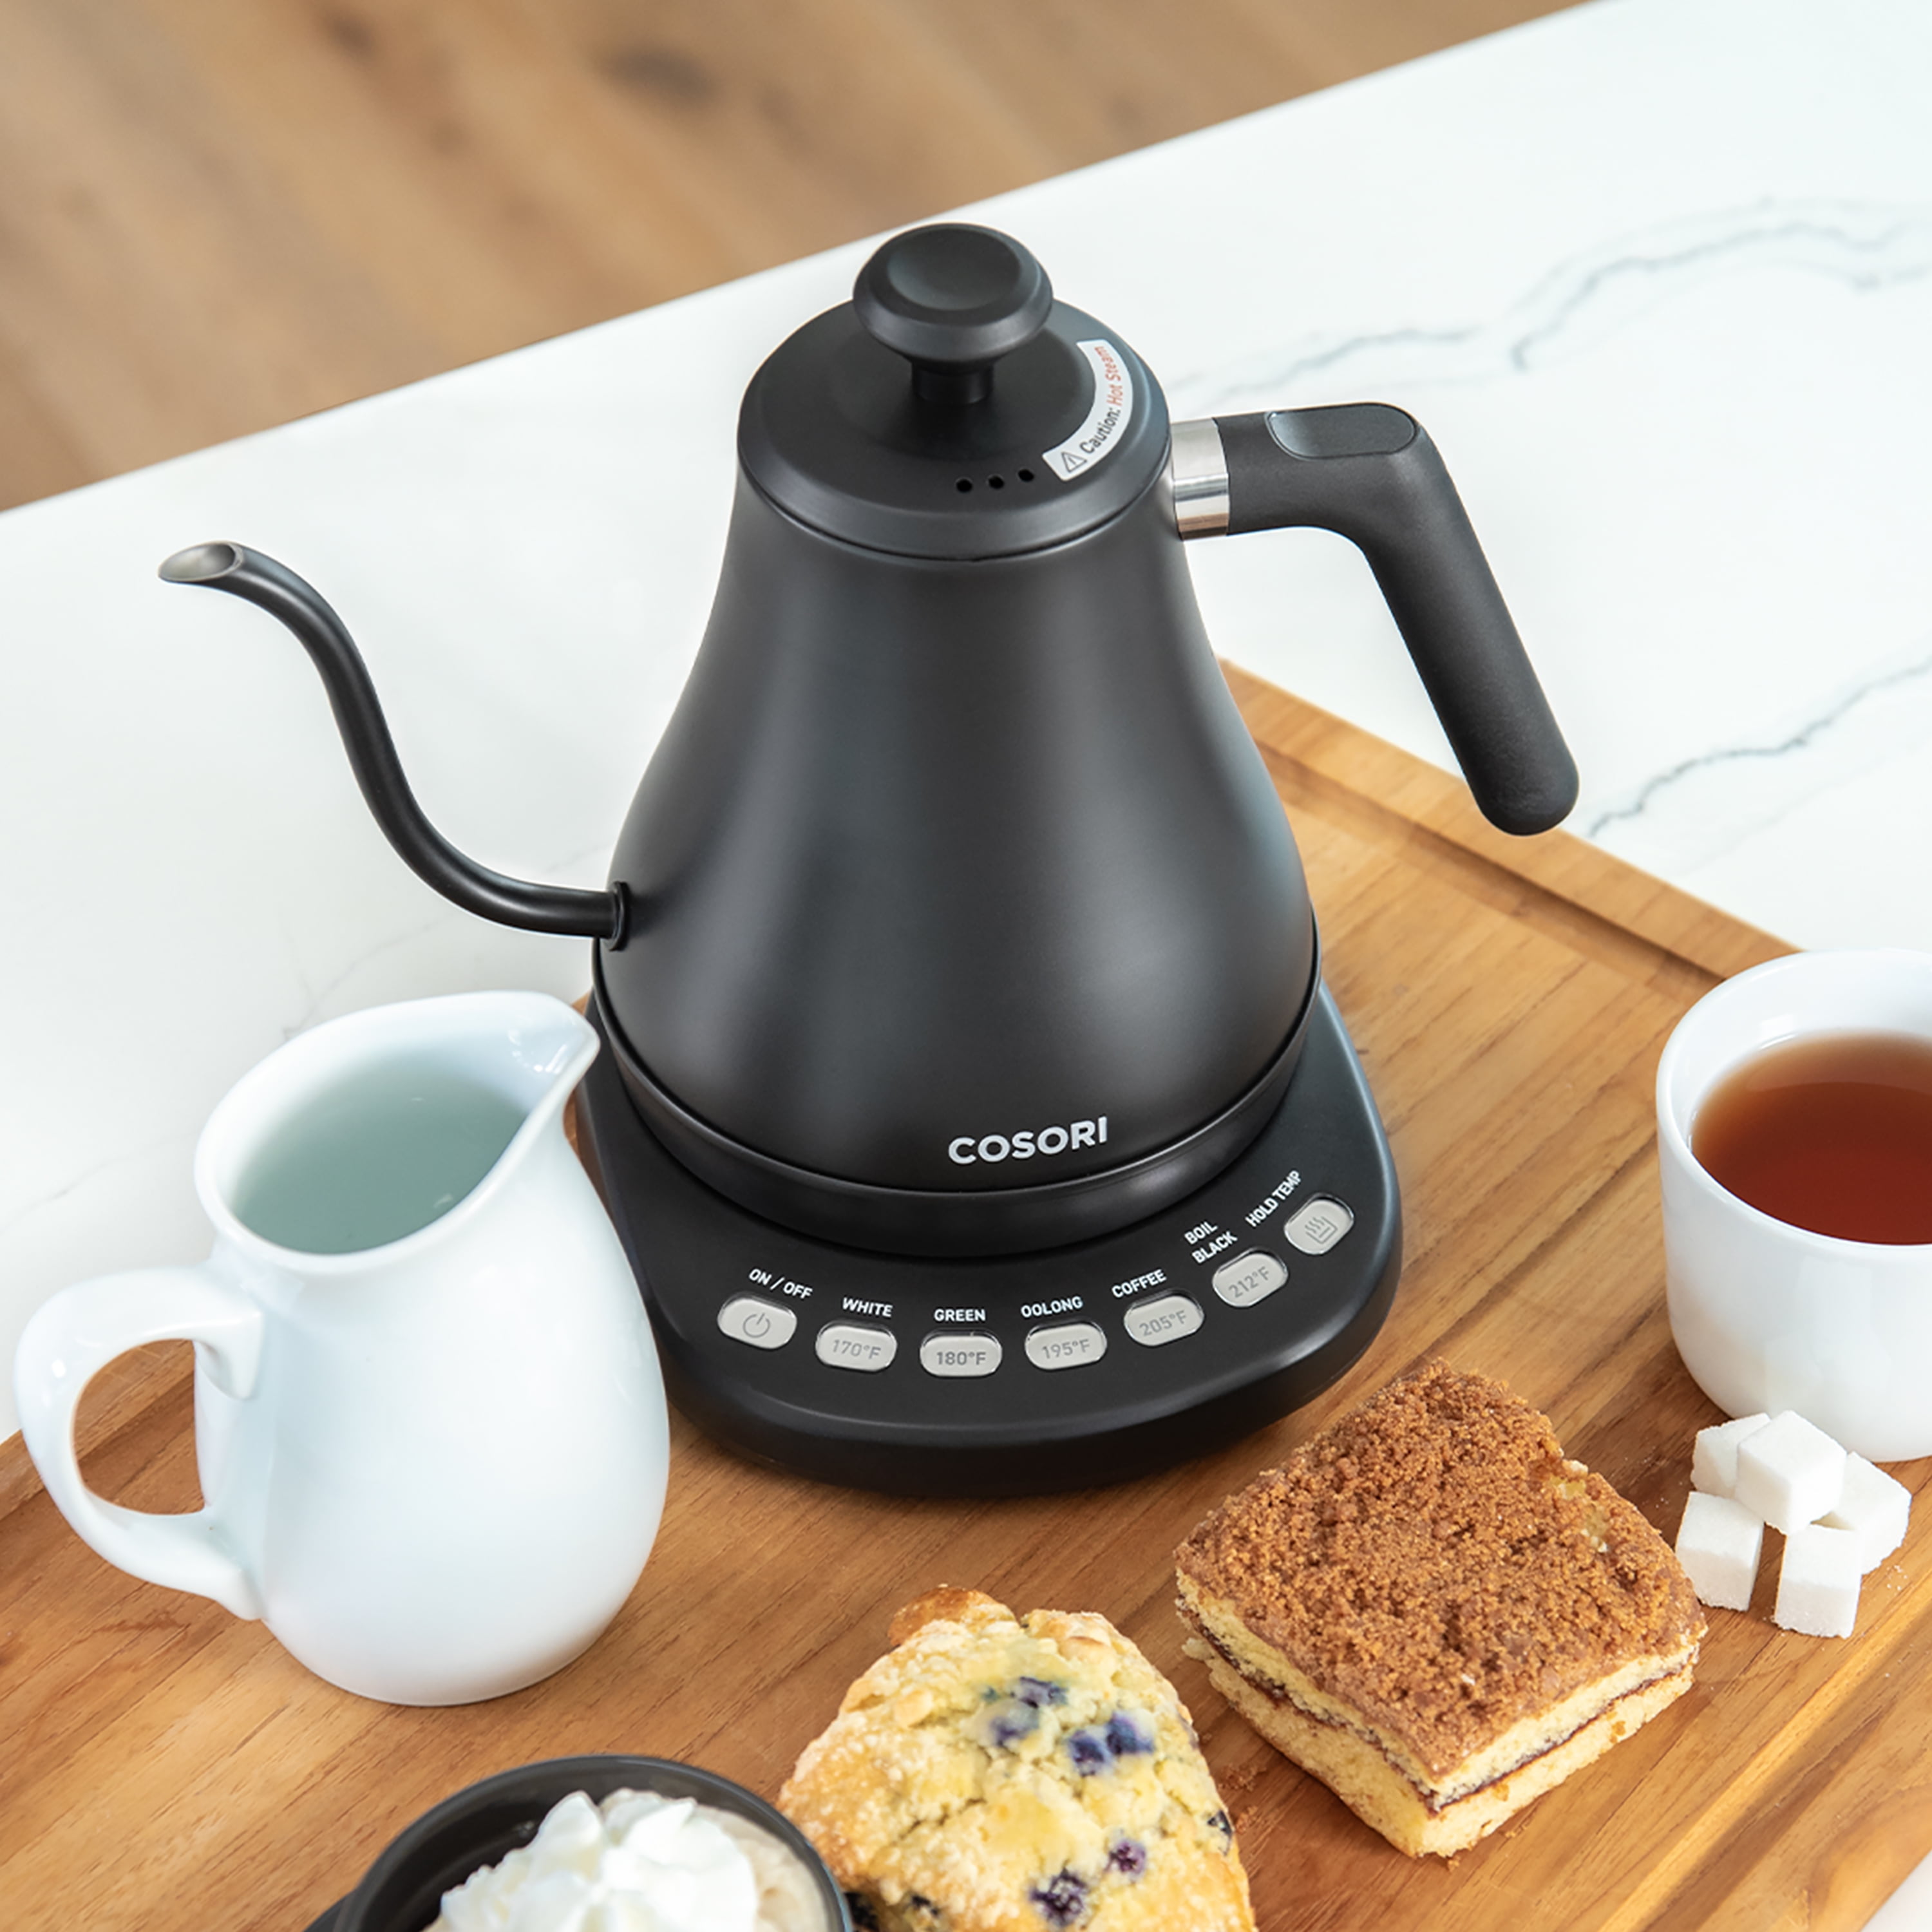 Cosori - Match your kettle to your style and preferences. The CS108-NK  Smart Gooseneck Kettle (left) and the CO117-DK Digital Glass Kettle (right)  are available for purchase on our website at cosori.com! (